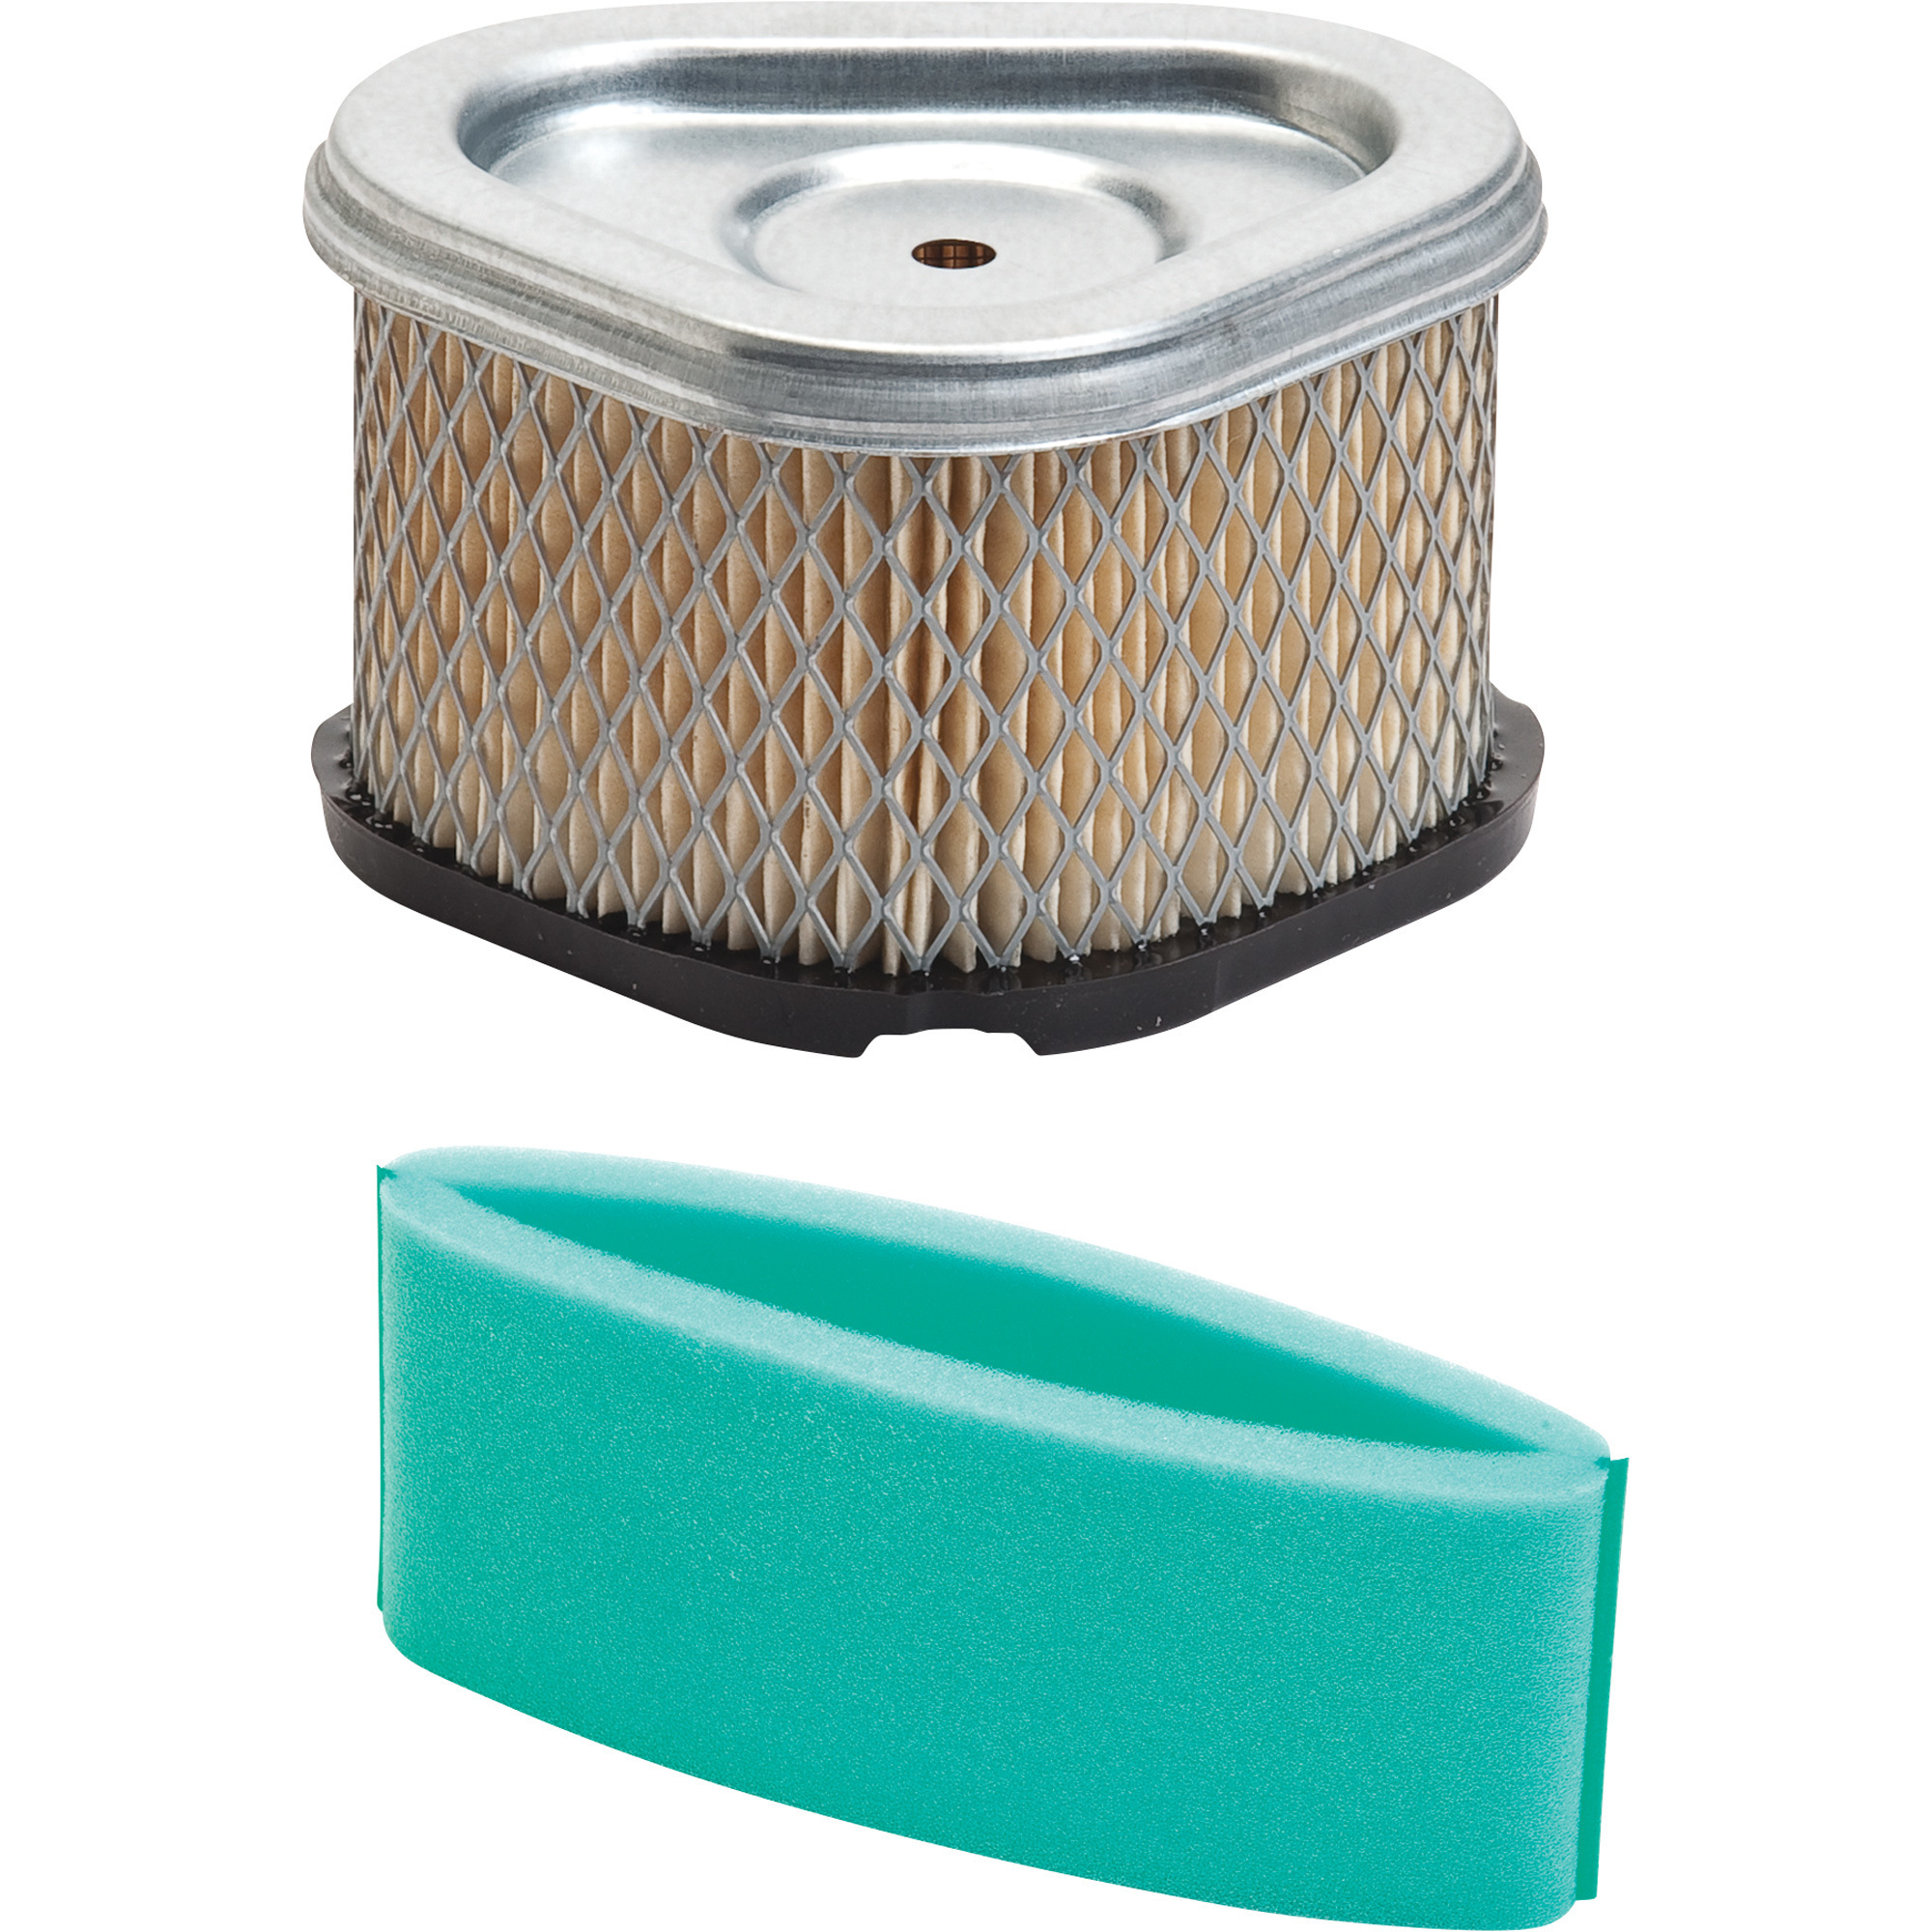 Oregon Air Filter and Pre-Cleaner Kit, Replacement for Kohler OEM Part# 12 883 05-S1, Model 30-085CSK